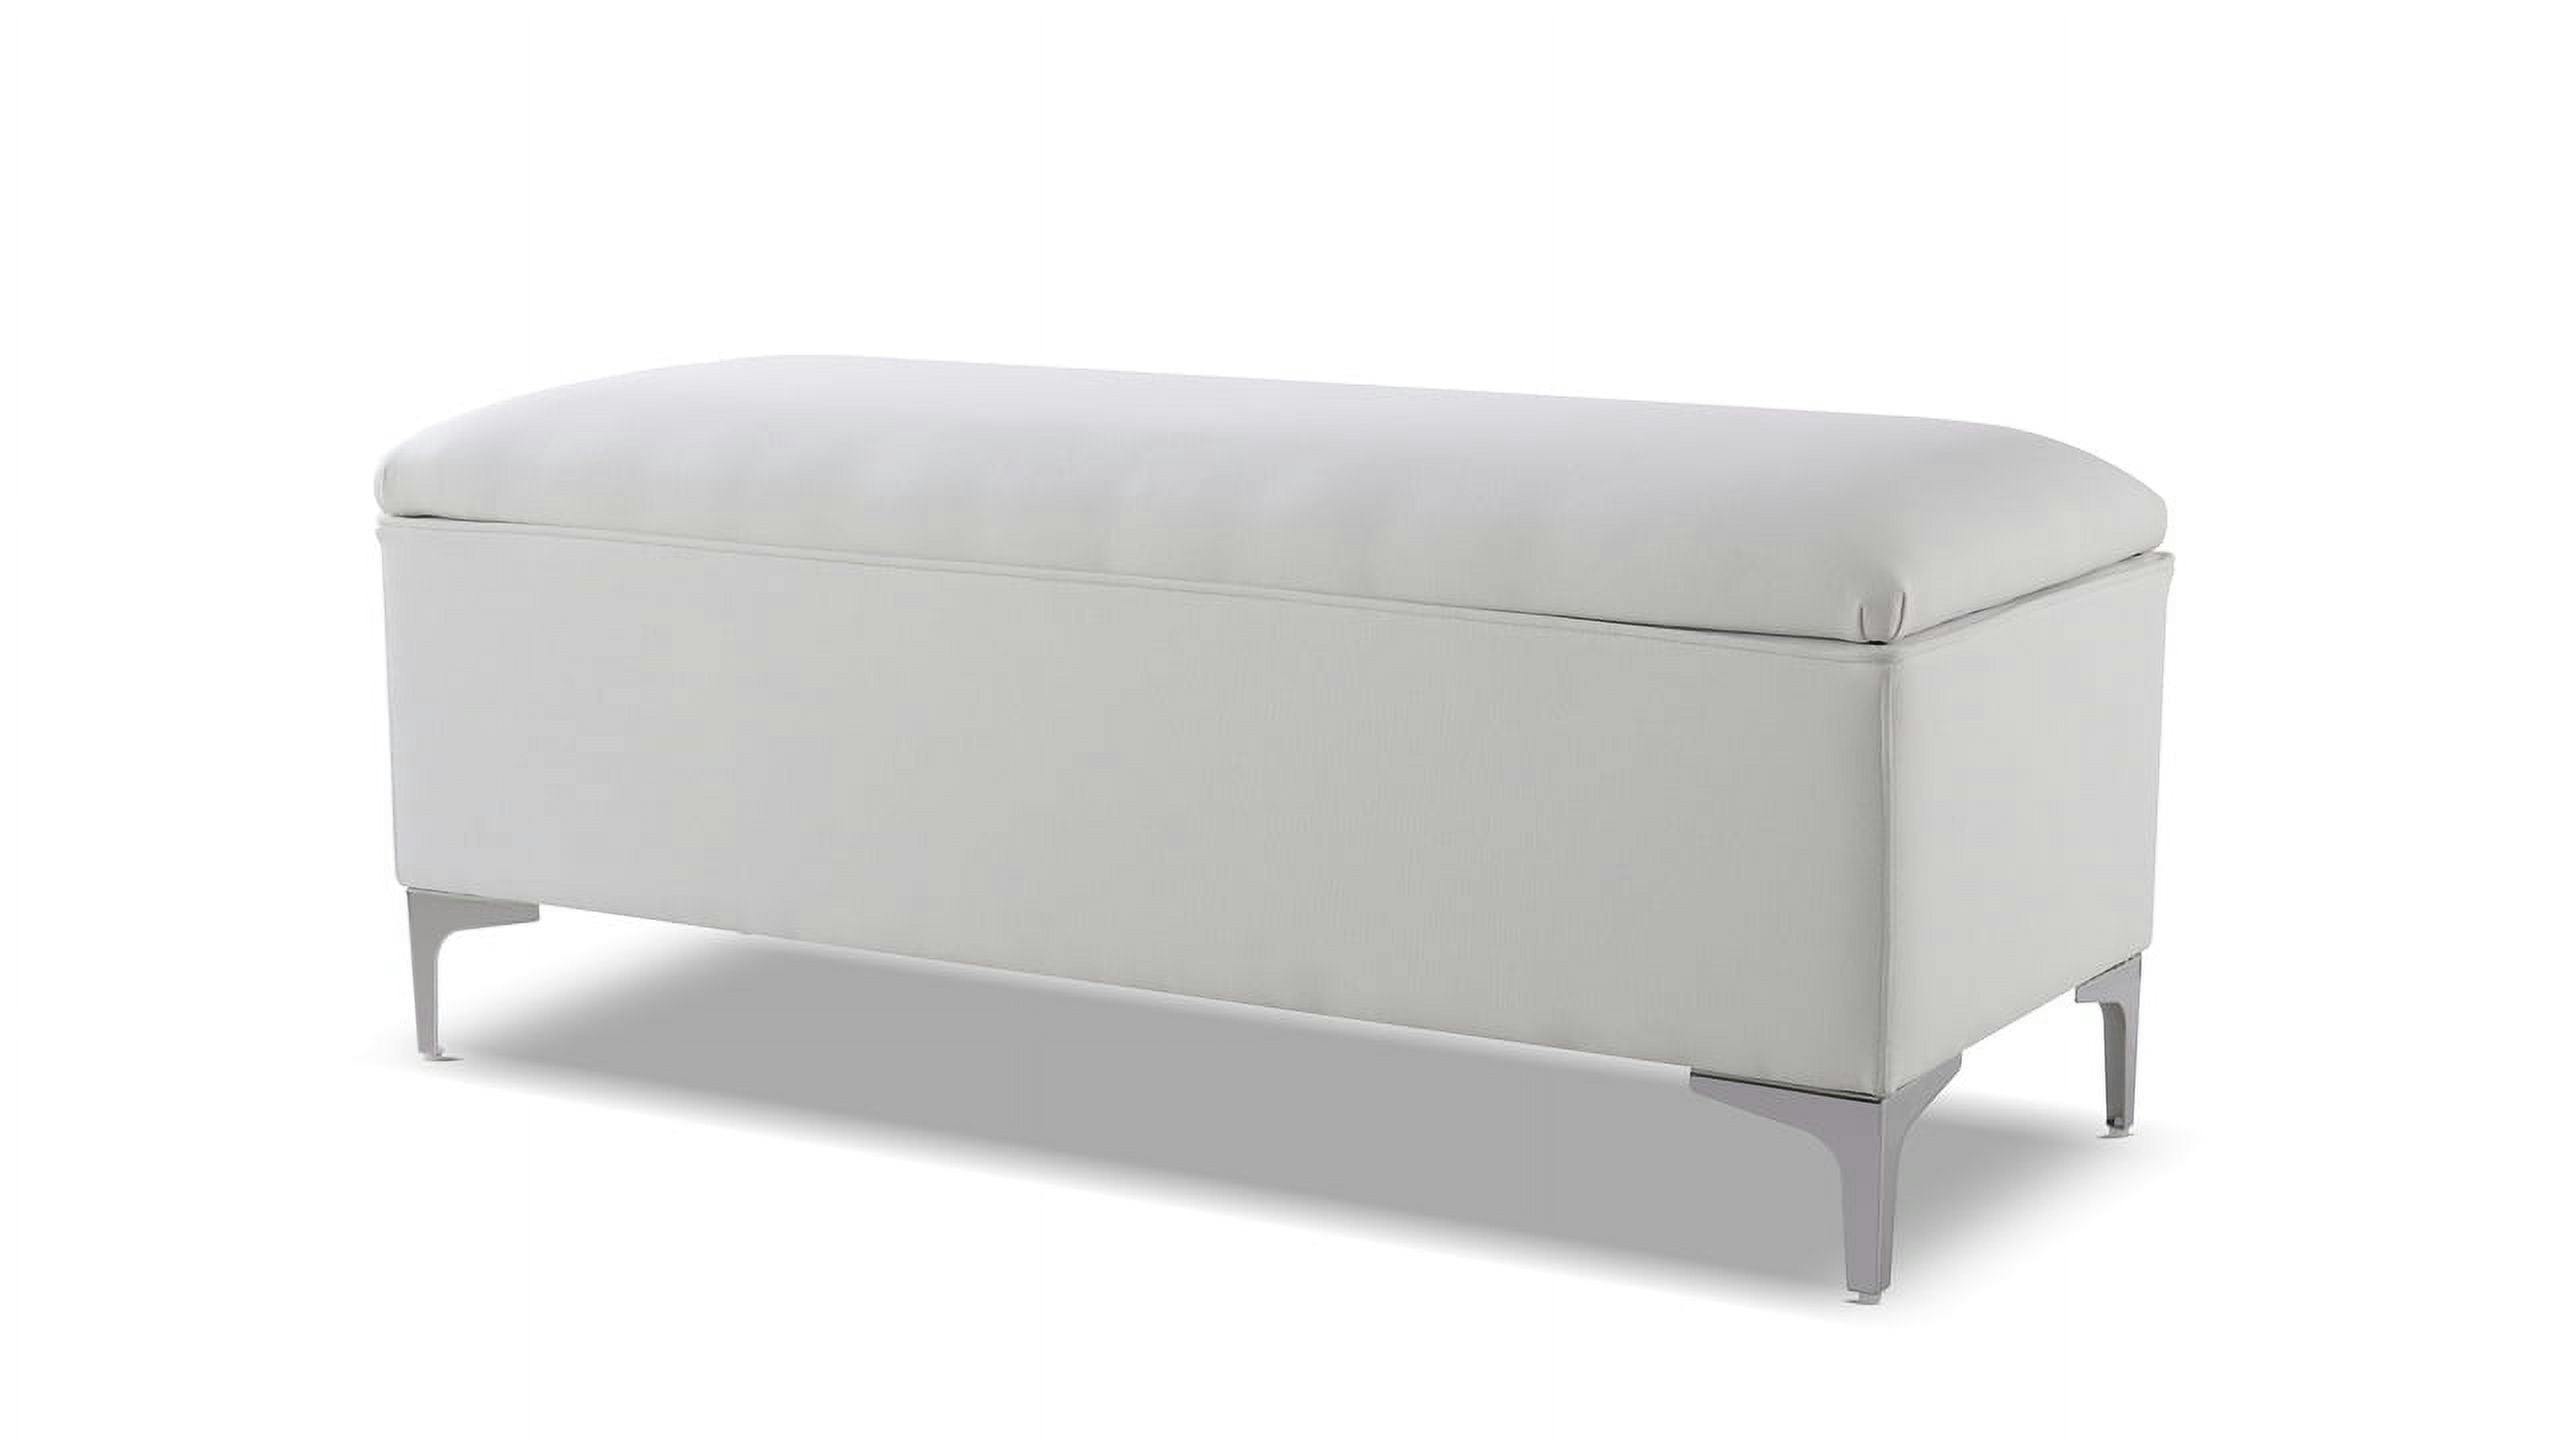 Madelyn Bright White Pine Wood Upholstered Storage Bench